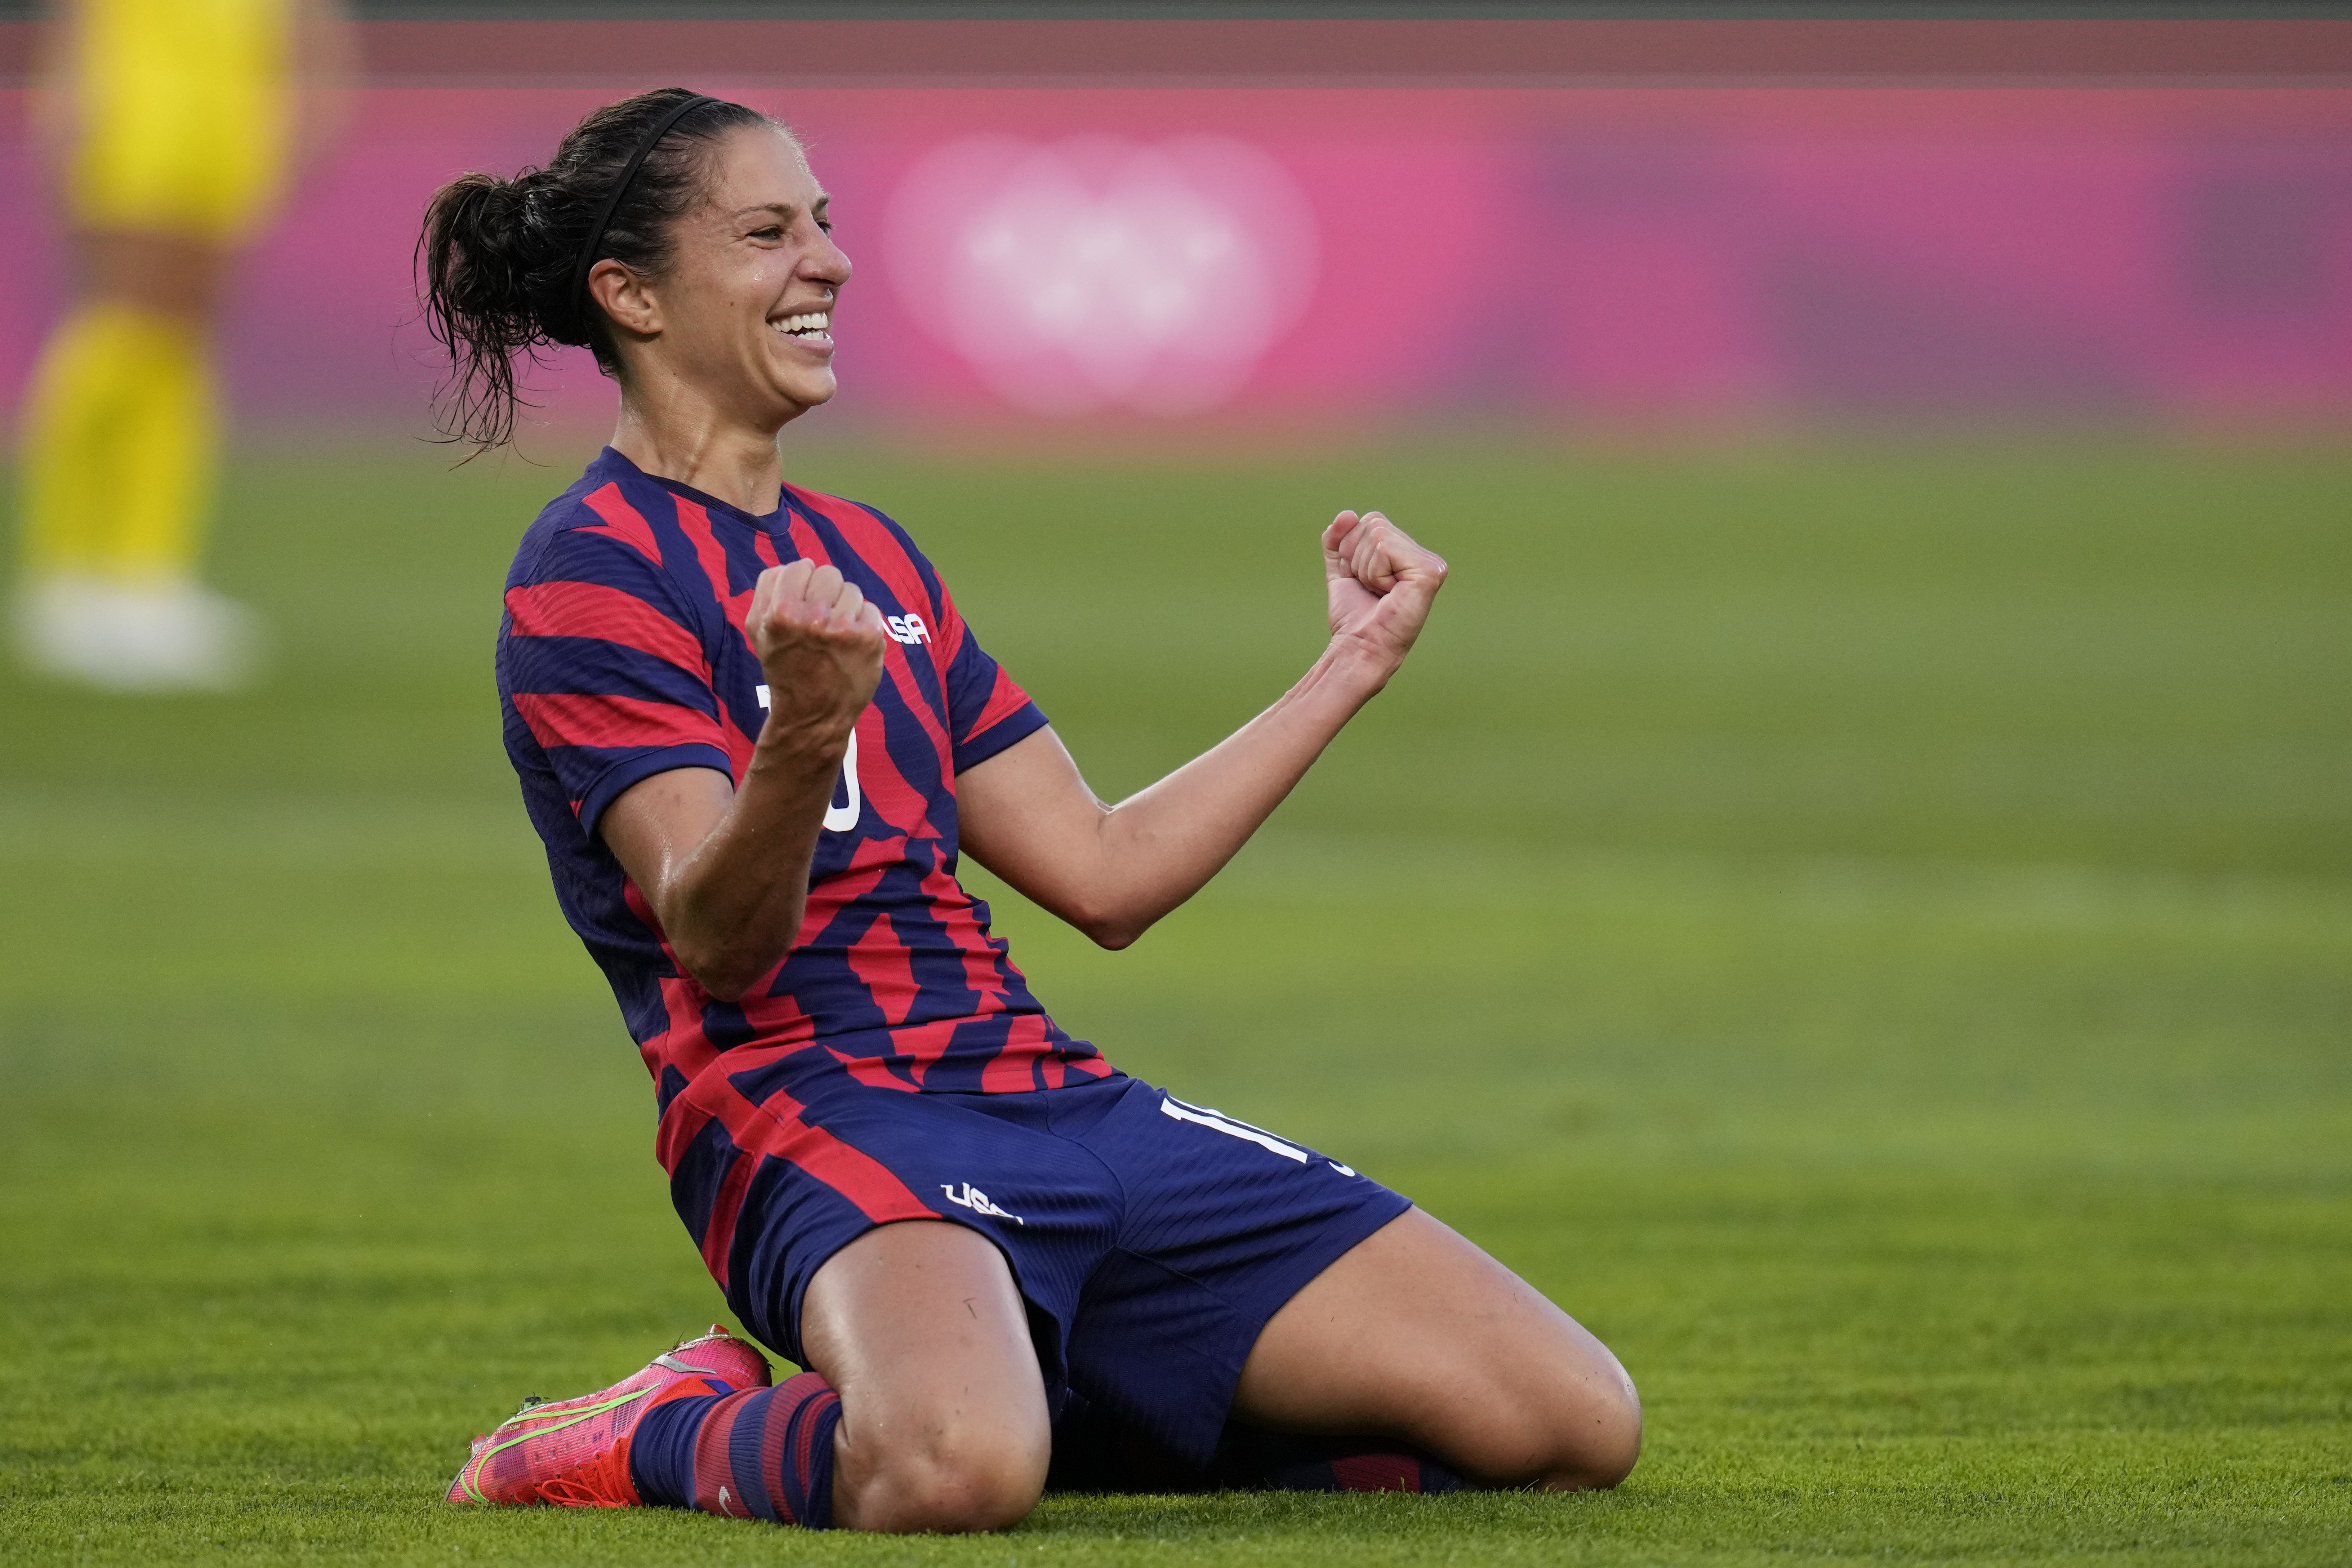 United States Women S National Soccer Team Vs Paraguay Live Stream 9 16 How To Watch Online Tv Time Al Com